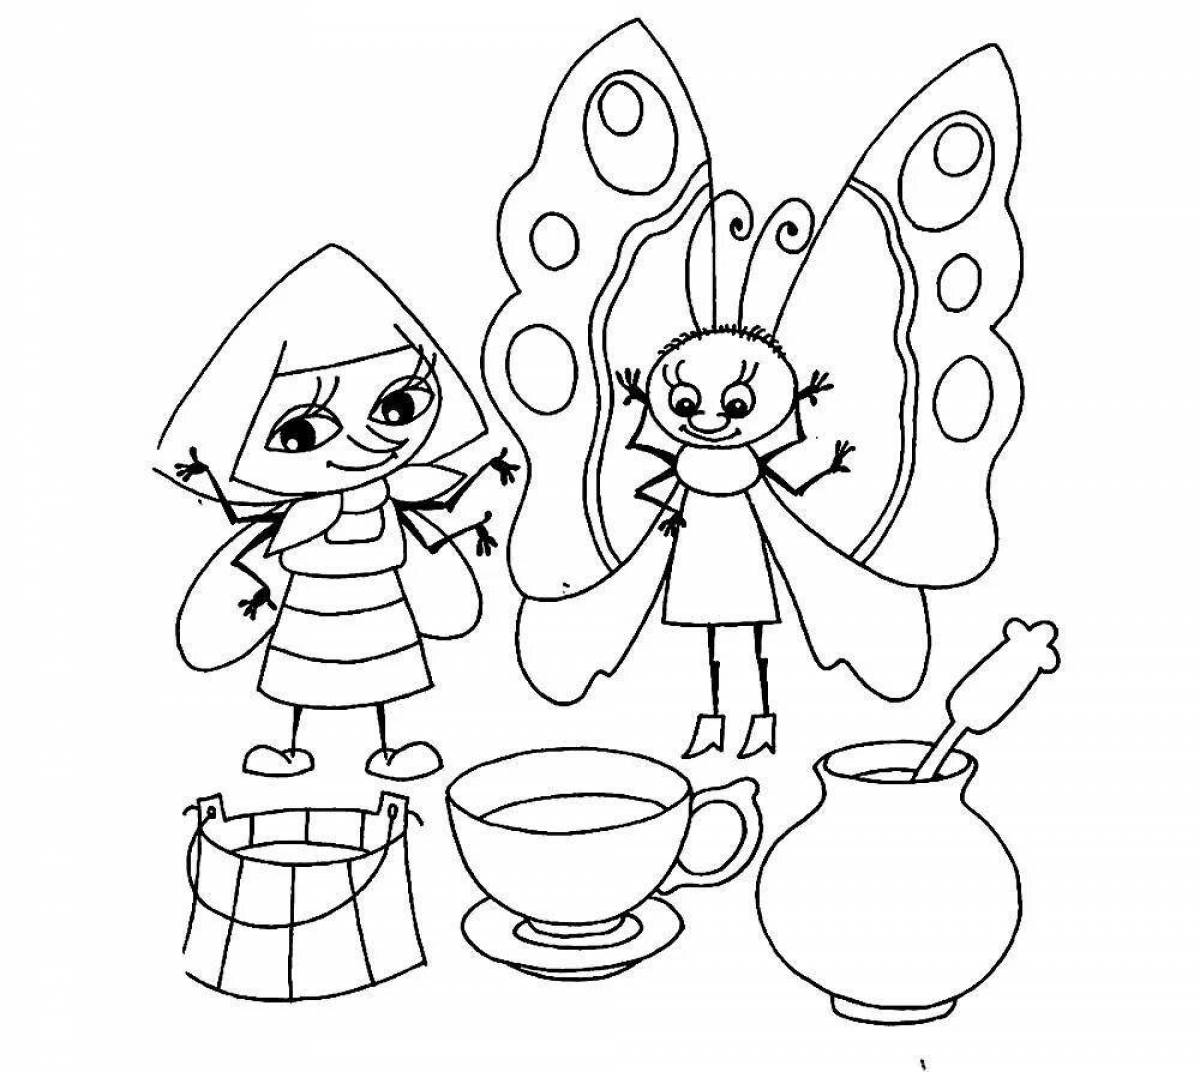 Charming coloring book visiting a fairy tale 4-5 years old middle group